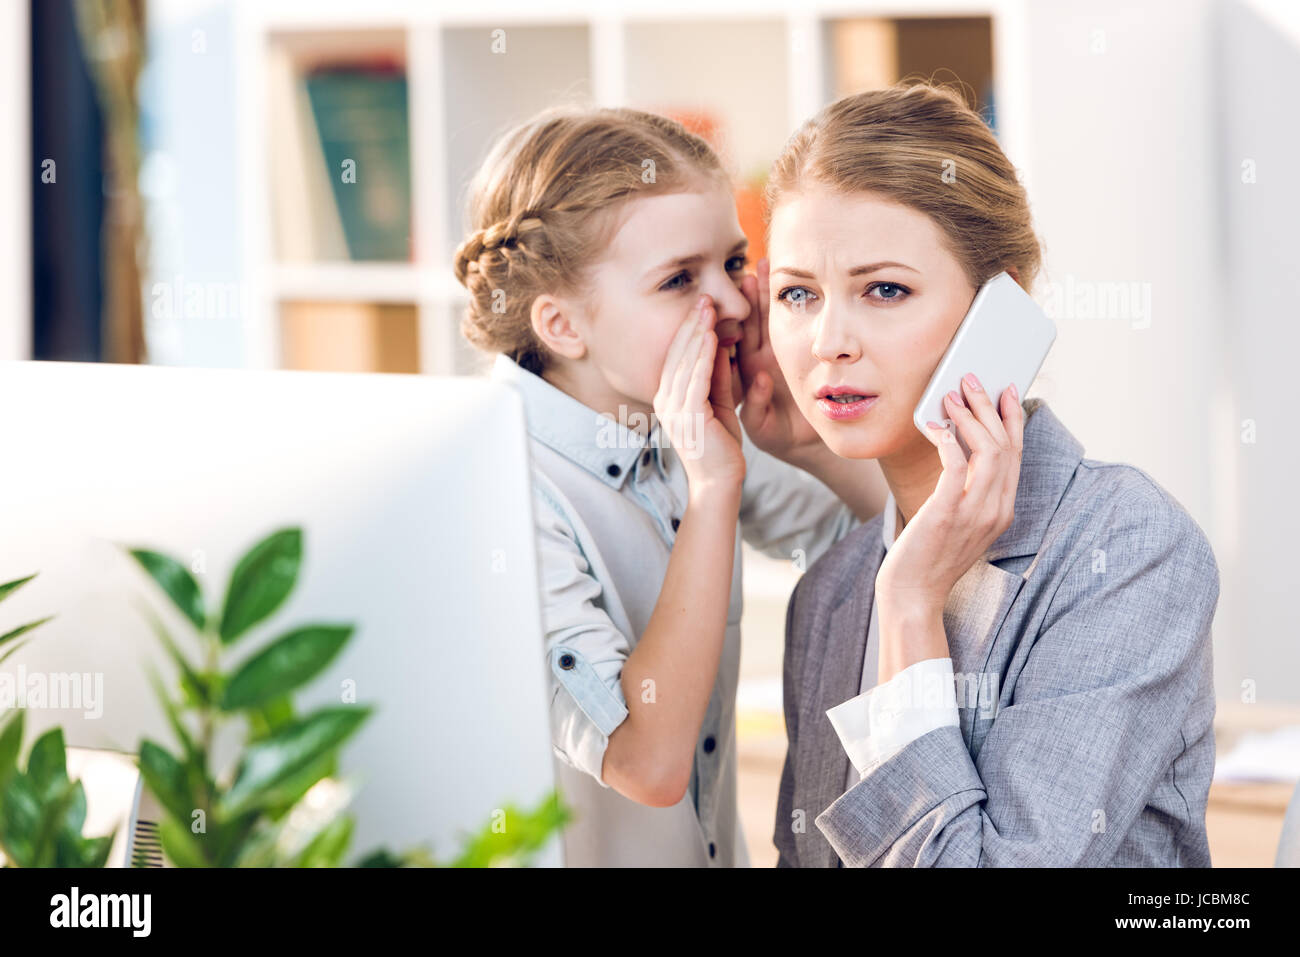 young mother and daughter talking in business office, businesswoman using smartphone Stock Photo